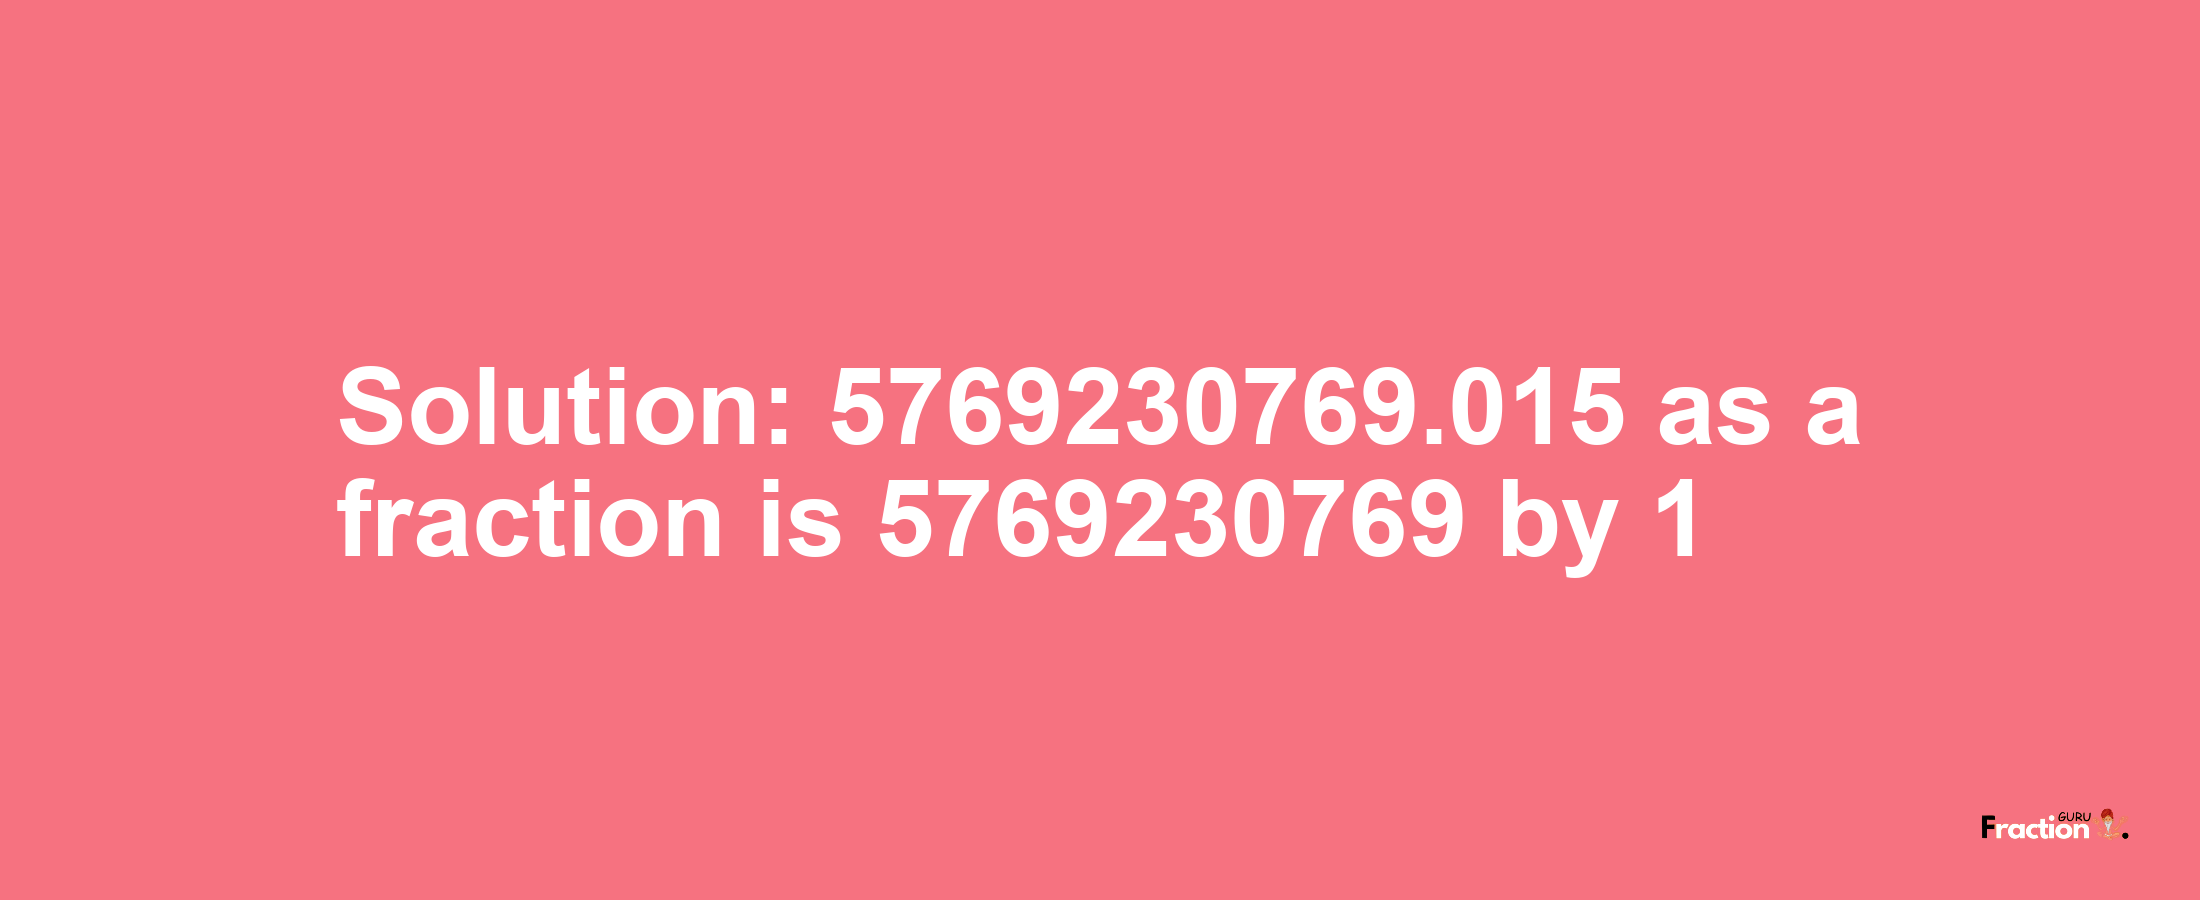 Solution:5769230769.015 as a fraction is 5769230769/1